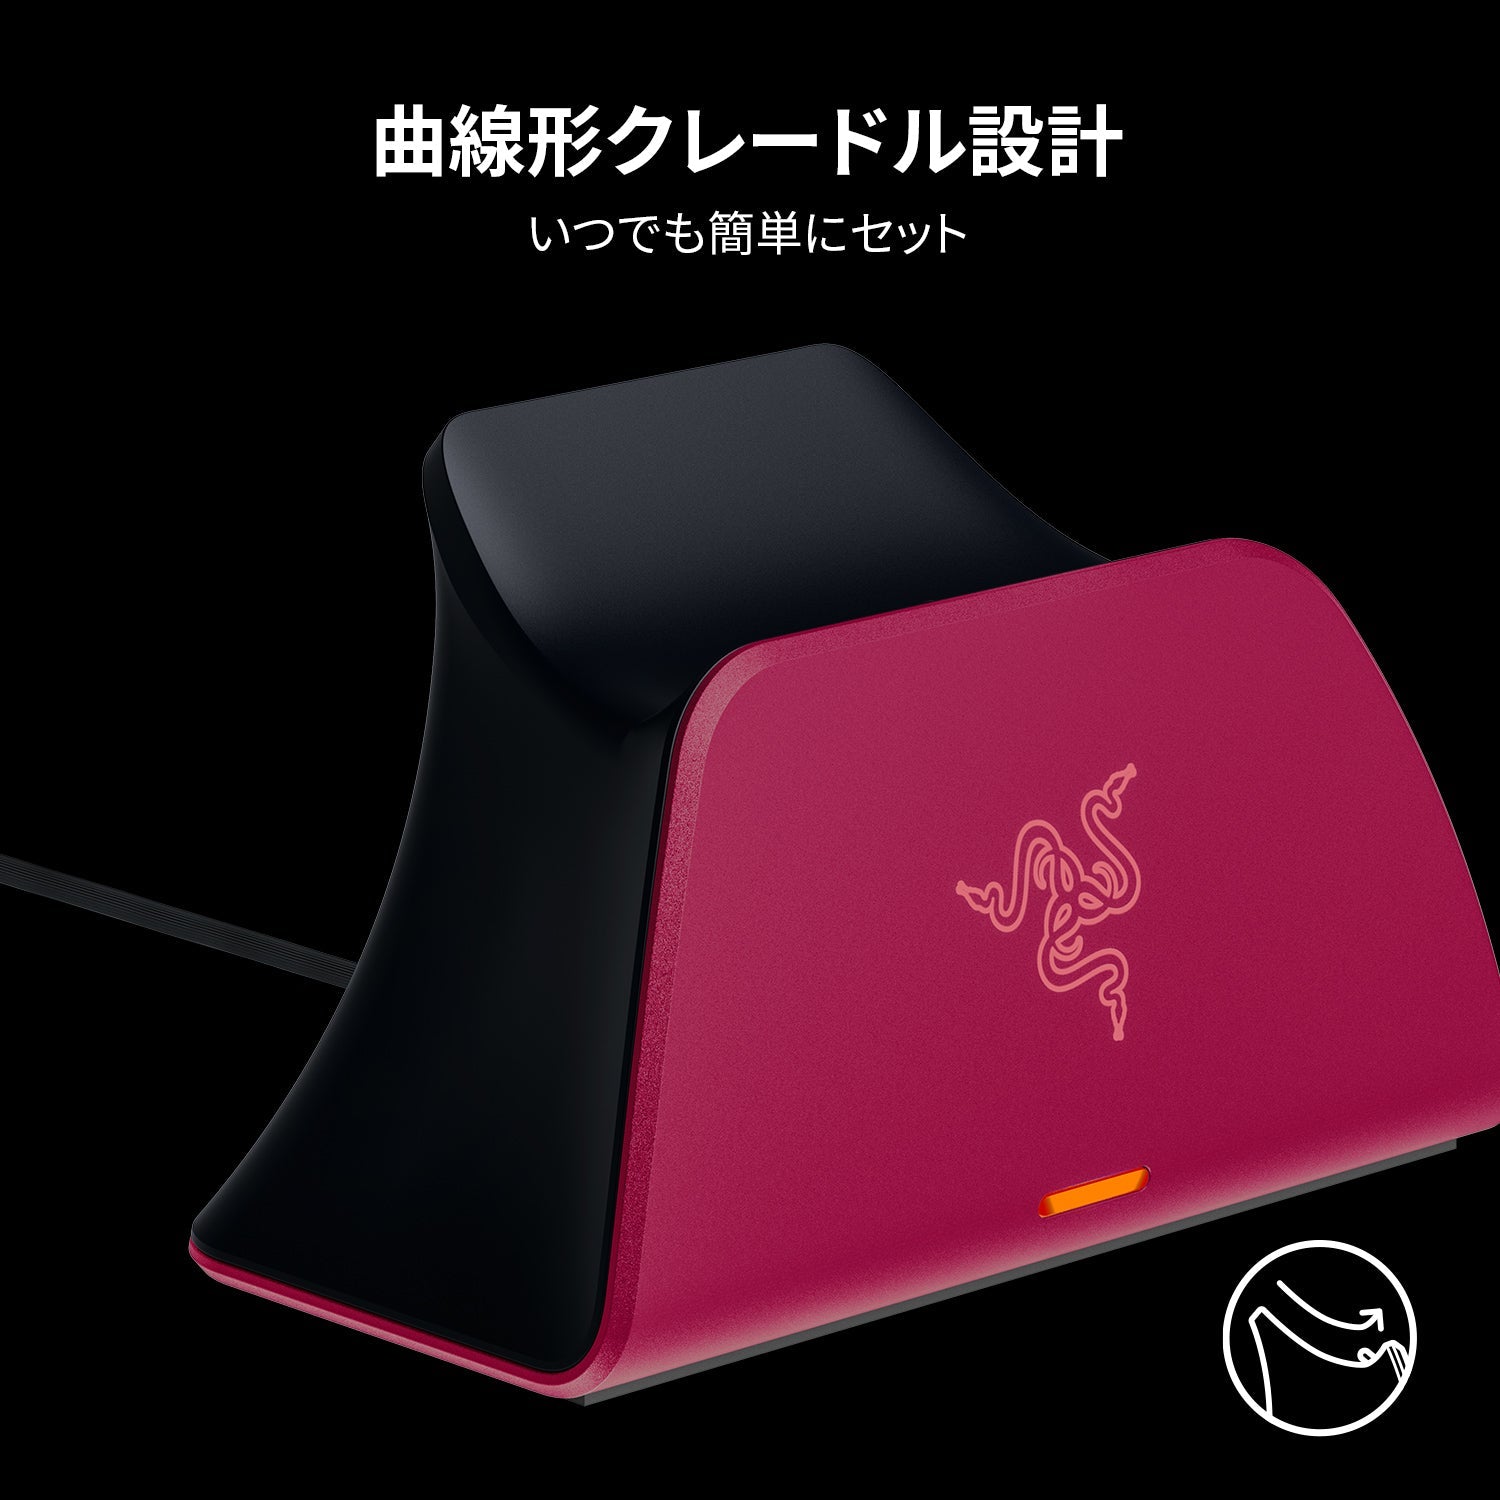 Razer Quick Charging Stand for PS5 (Red) クイック チャージング スタンド フォー ピーエスファイブ レッド thumbnail 3